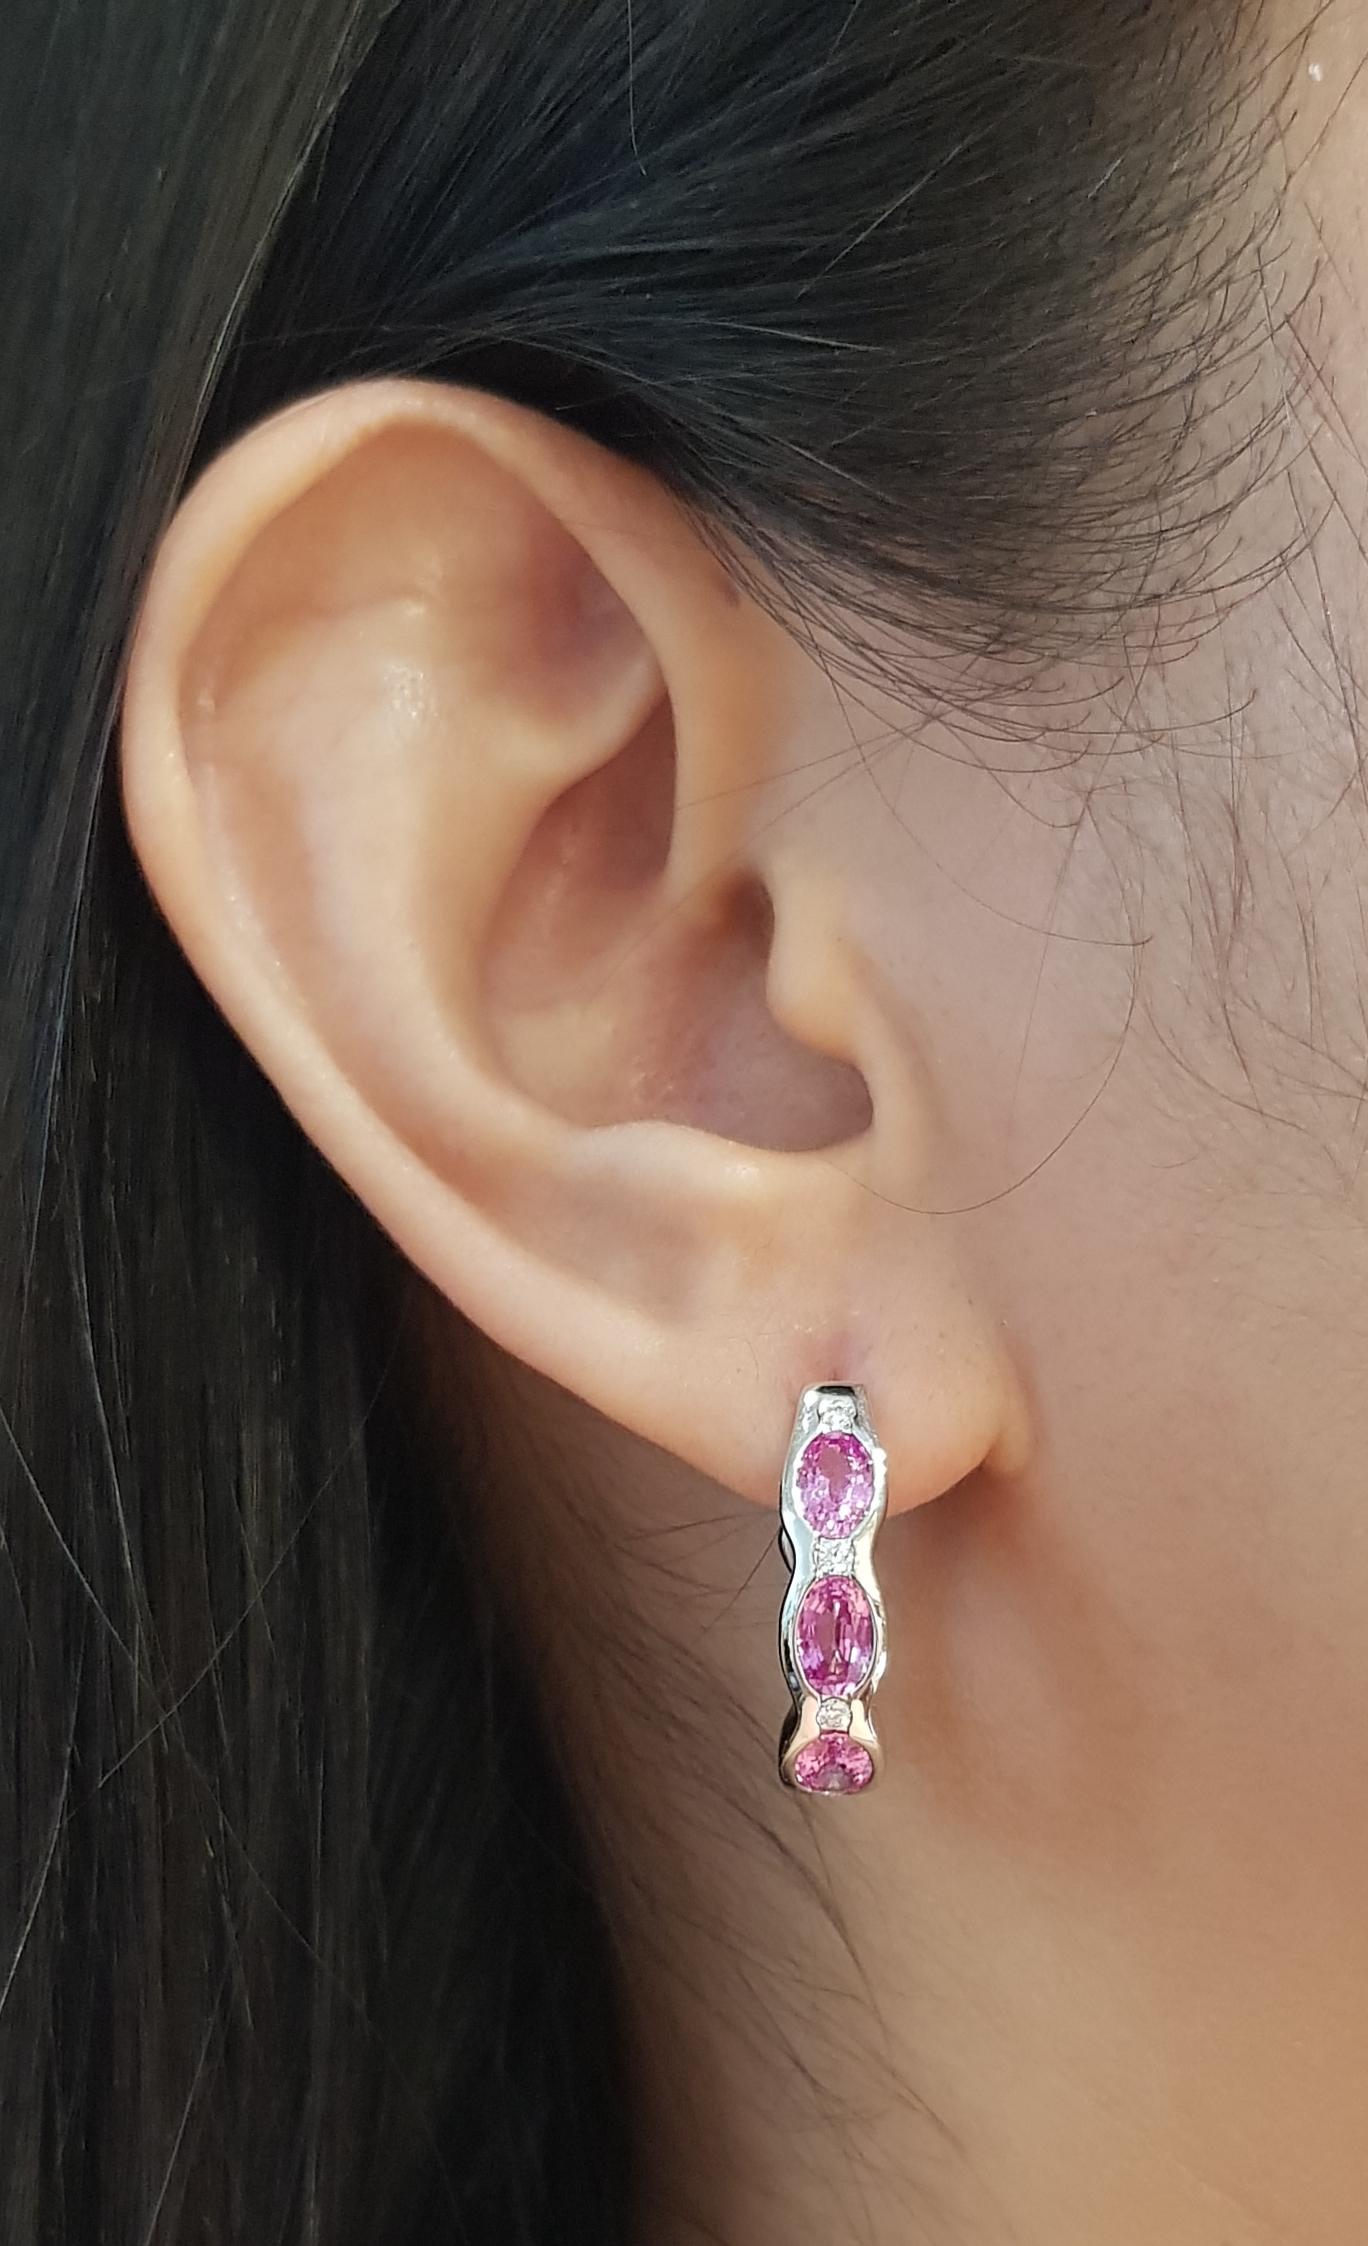 Pink Sapphire 3.41 carats with Diamond 0.14 carat Earrings set in 18K White Gold Settings

Width: 0.6 cm 
Length: 2.2 cm
Total Weight: 8.32 grams

